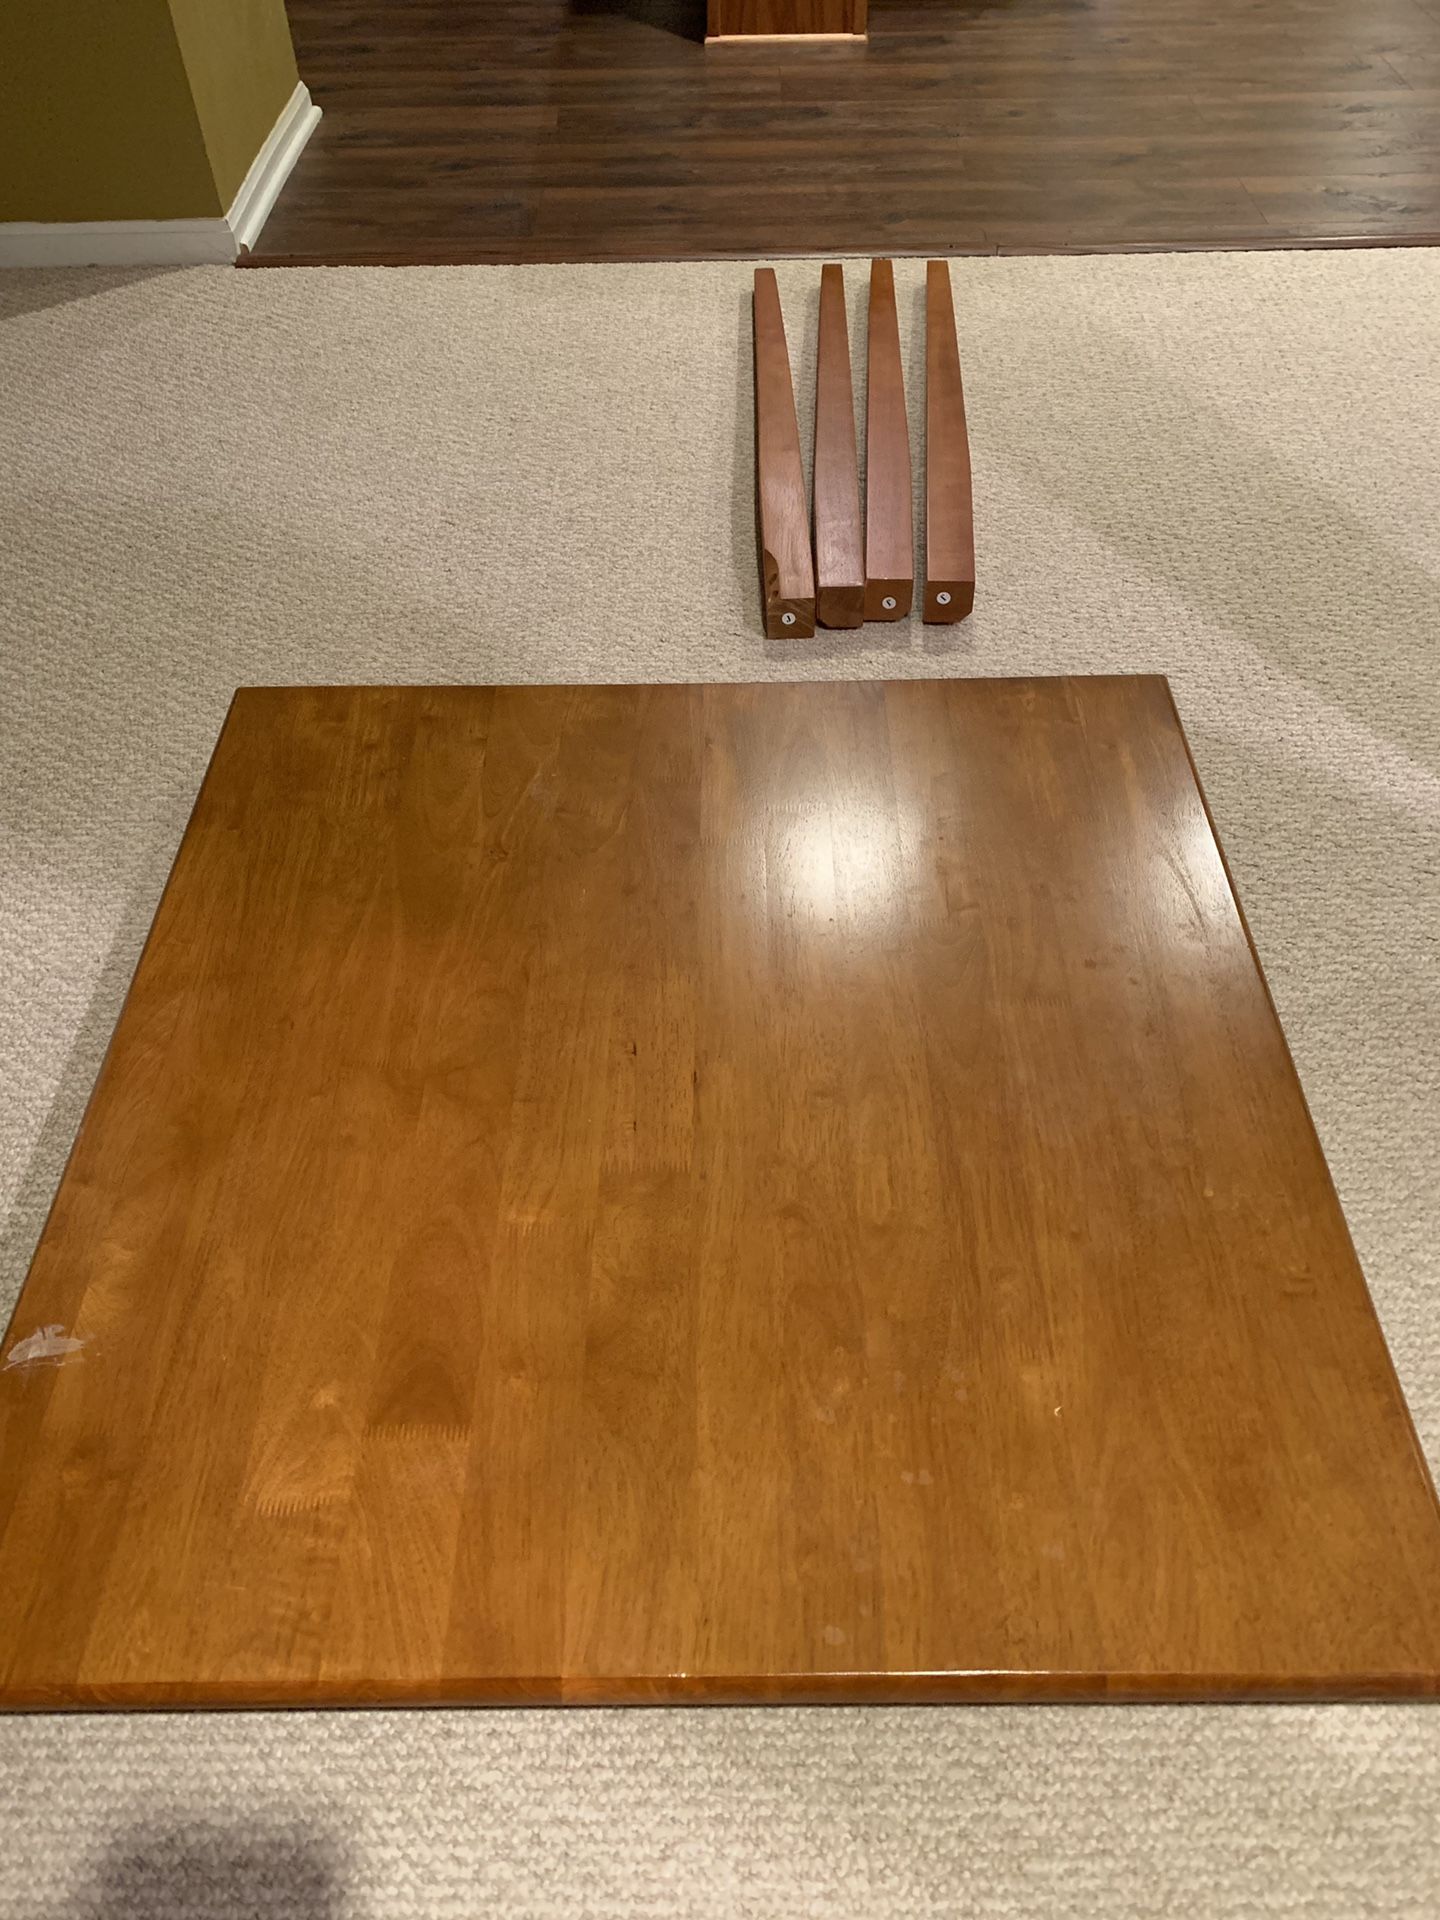 Wood counter height dining table set, chairs can be used as bar stools - $80